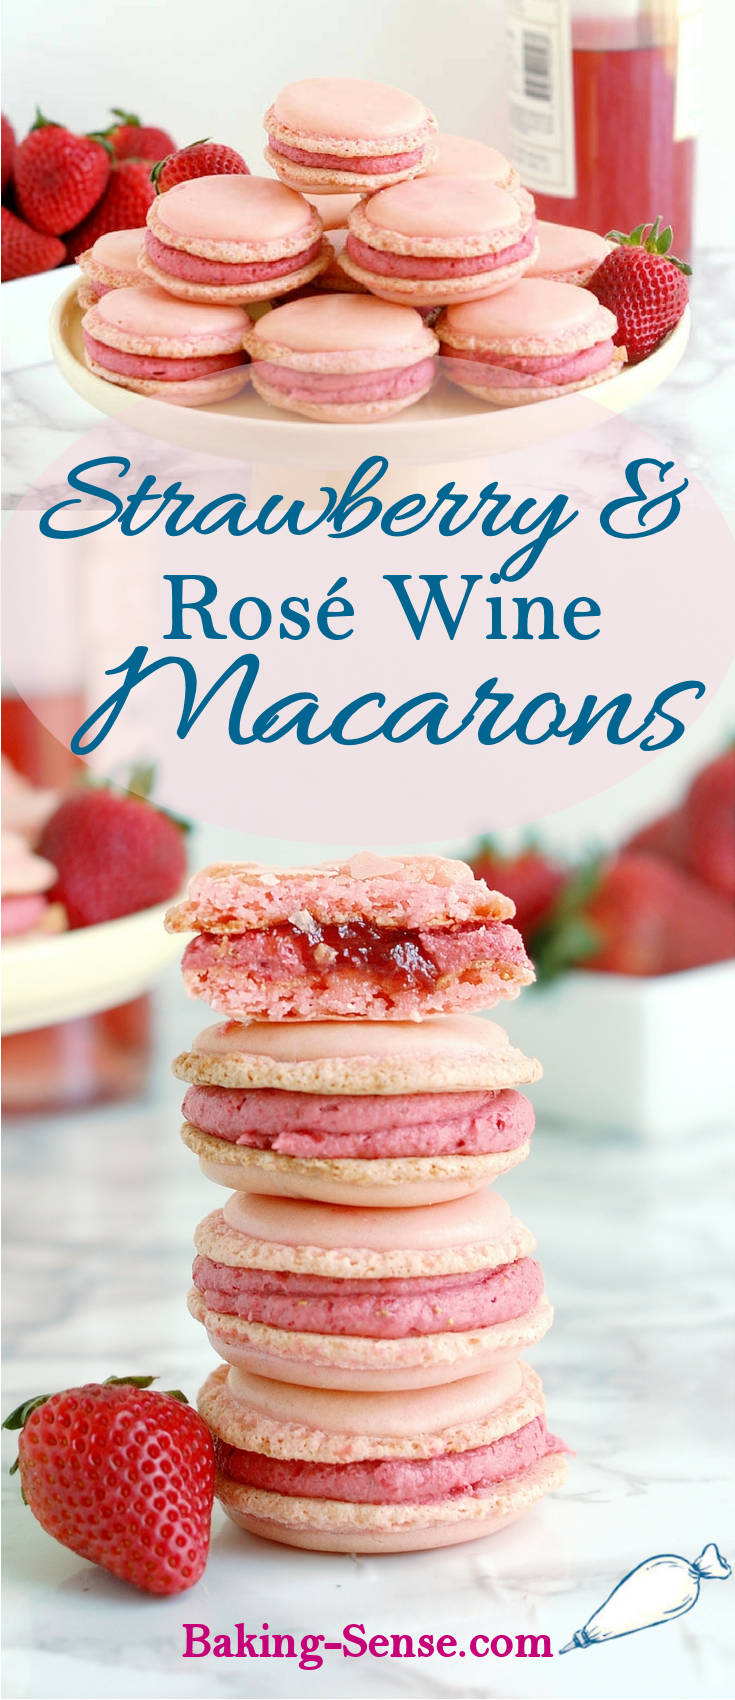 Strawberry & Rosé Wine Macarons - With Video - Baking Sense®